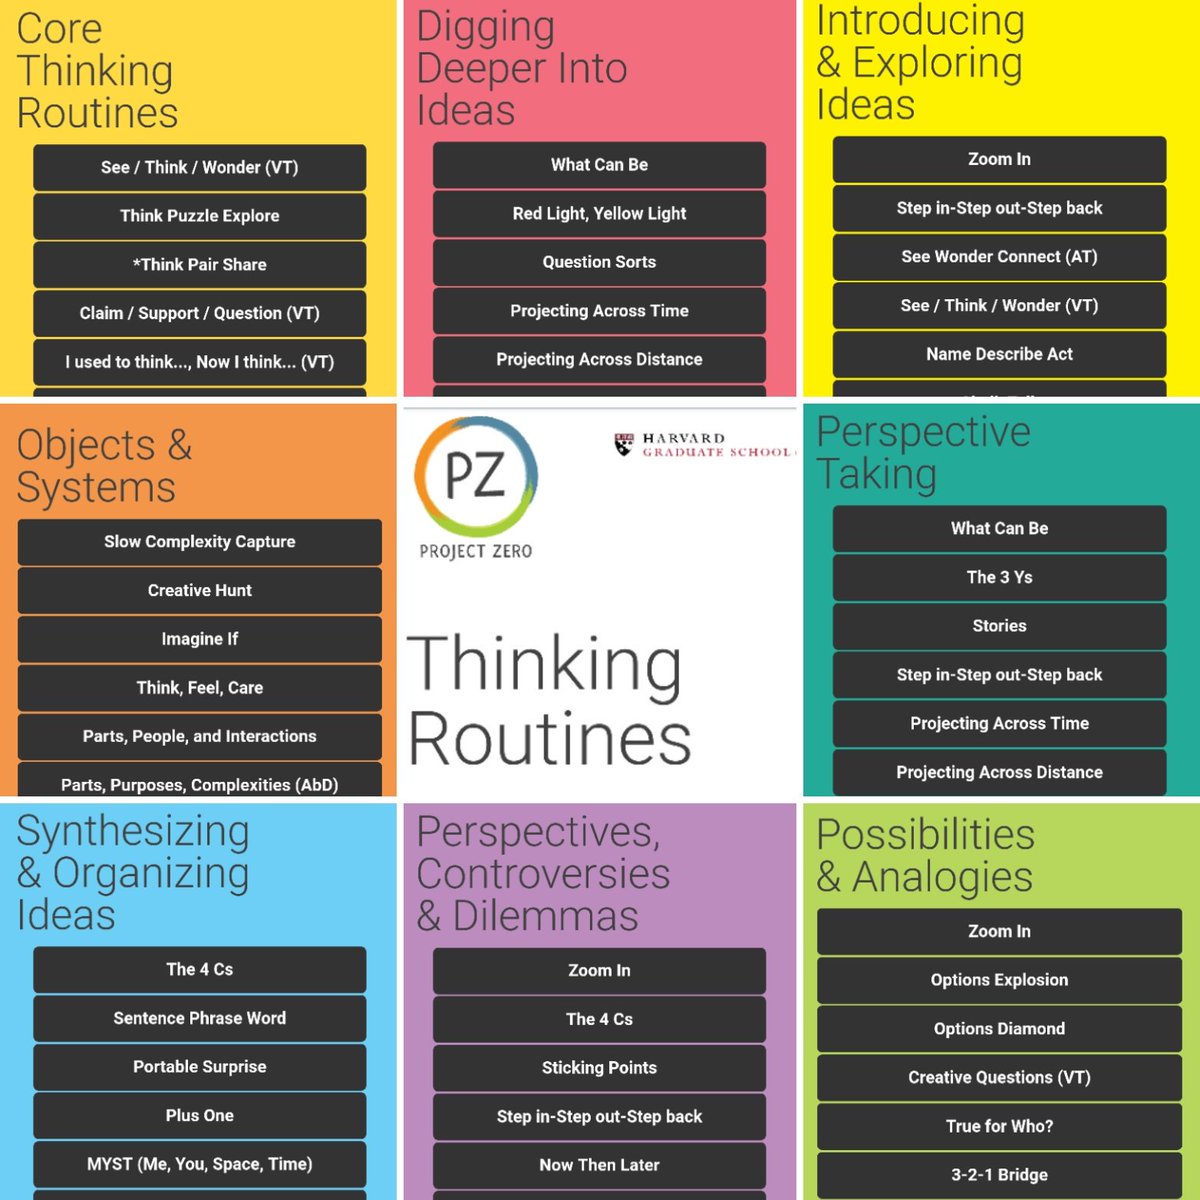 The new site looks great!  @RonRitchhart  @ProjectZeroHGSE  @erika_lusky  @cpaterso  @nataliecmartino  @s_ghouse  @LennyDutton  @ncoutts  #PZCoach  http://pz.harvard.edu/thinking-routines